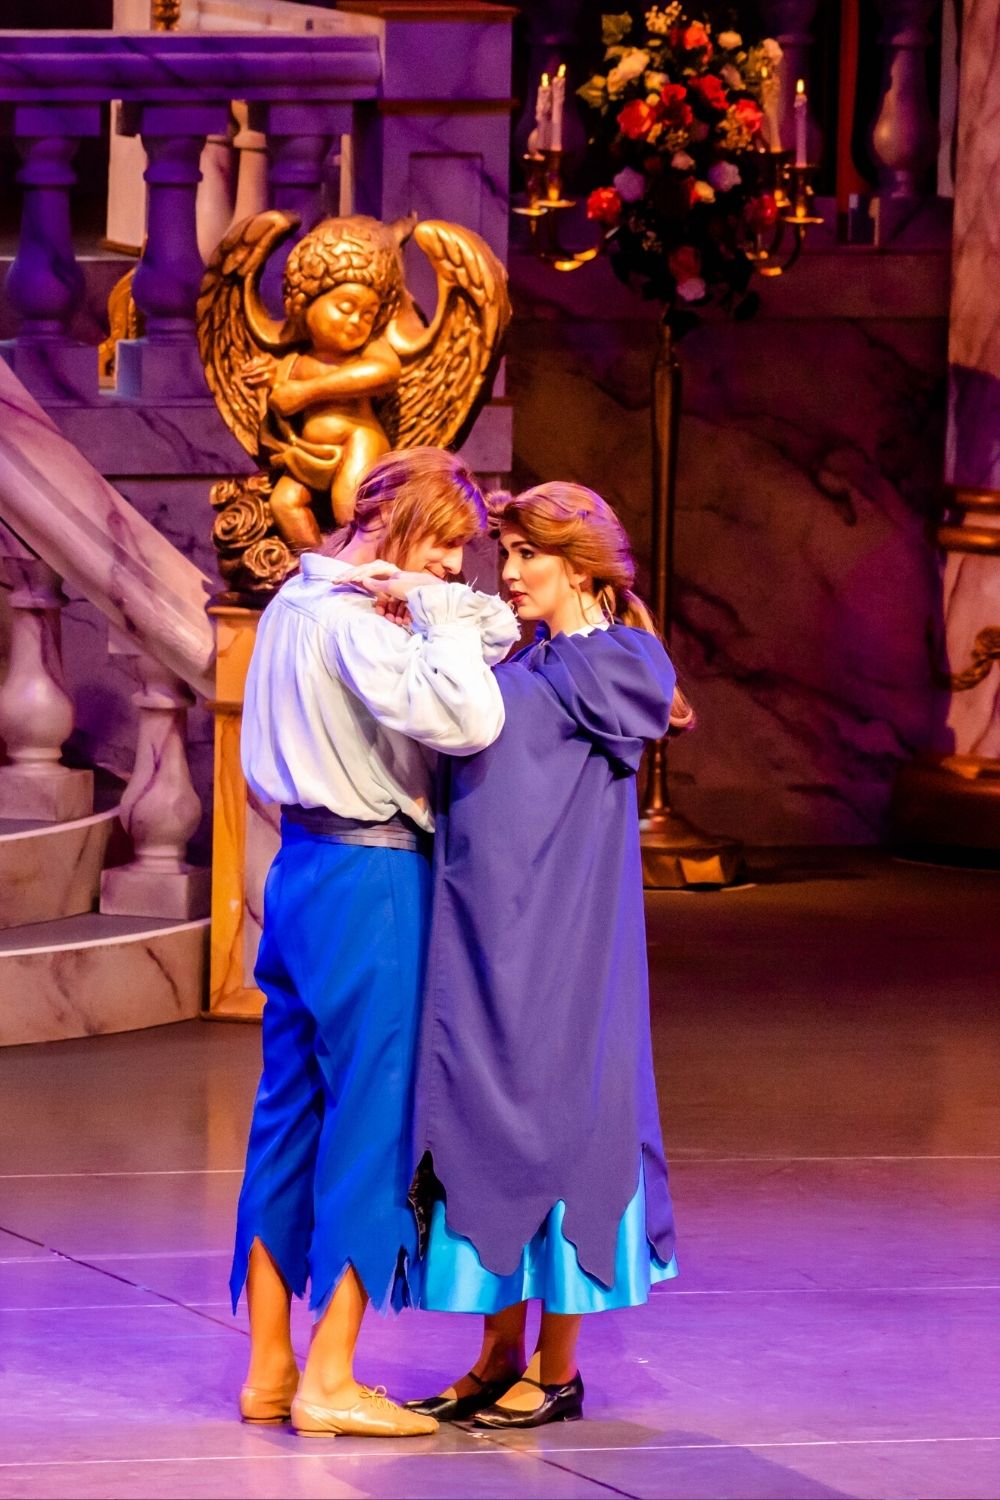 Belle and Prince Adam (the Beast) during the Beauty and the Beast stage production at Hollywood Studios